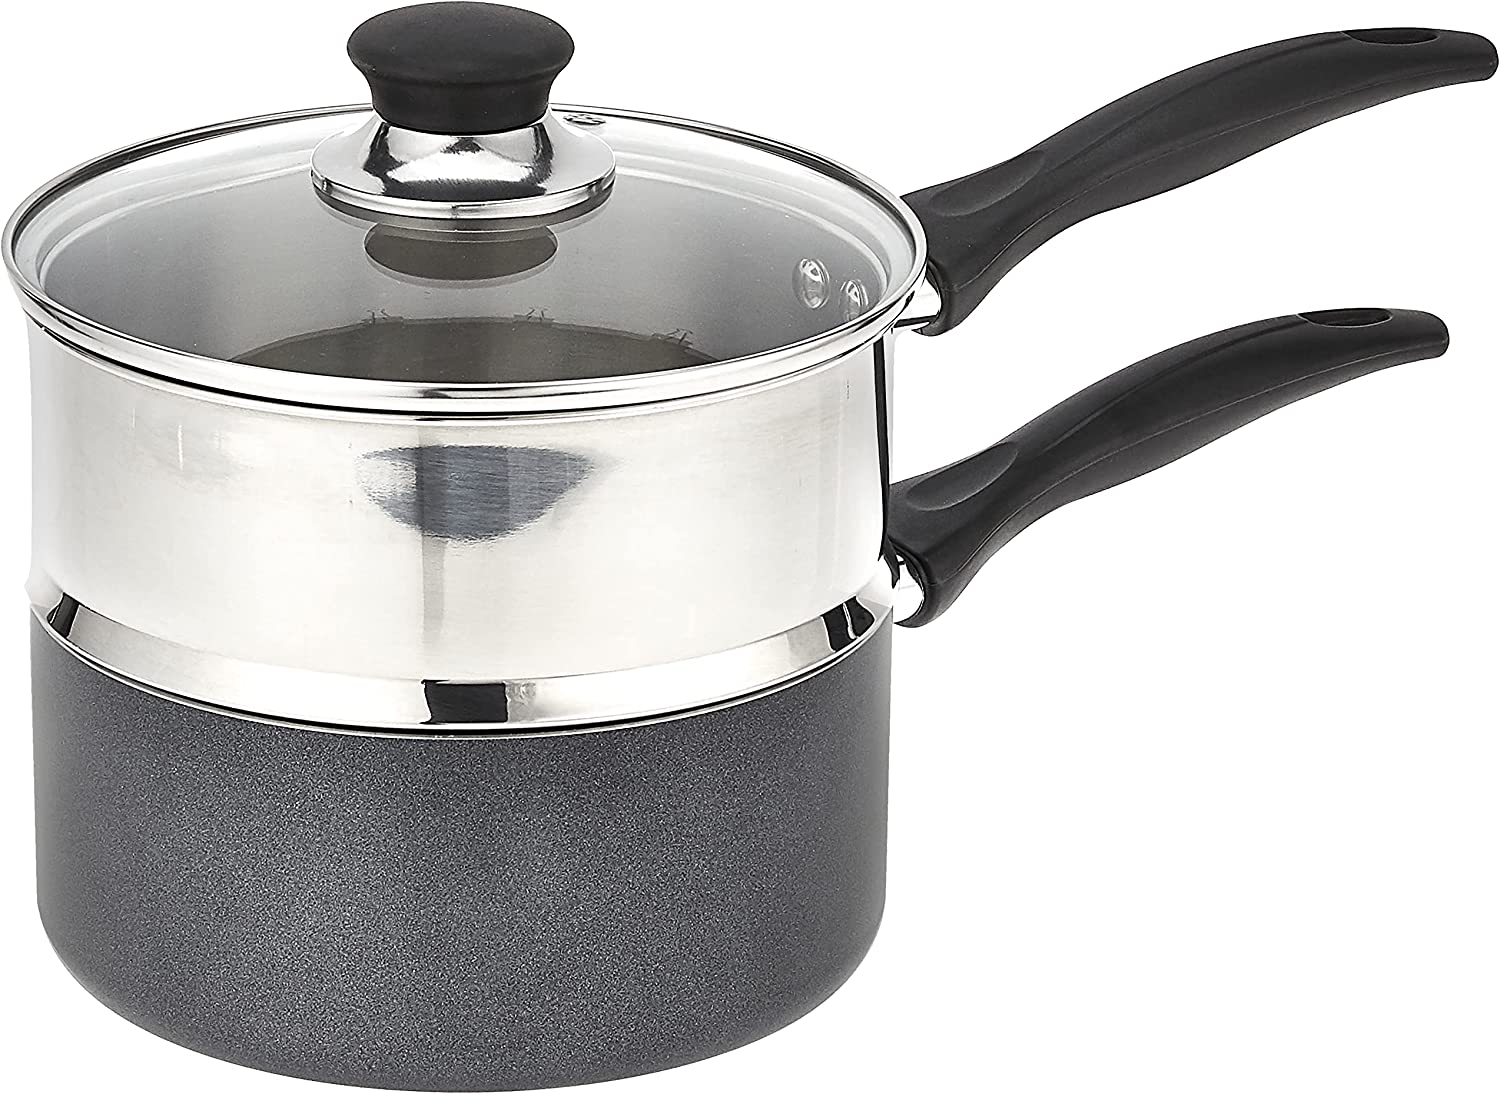 T-fal B1399663 Nonstick Stainless Steel Double Boiler For Chocolate, 3-Quart